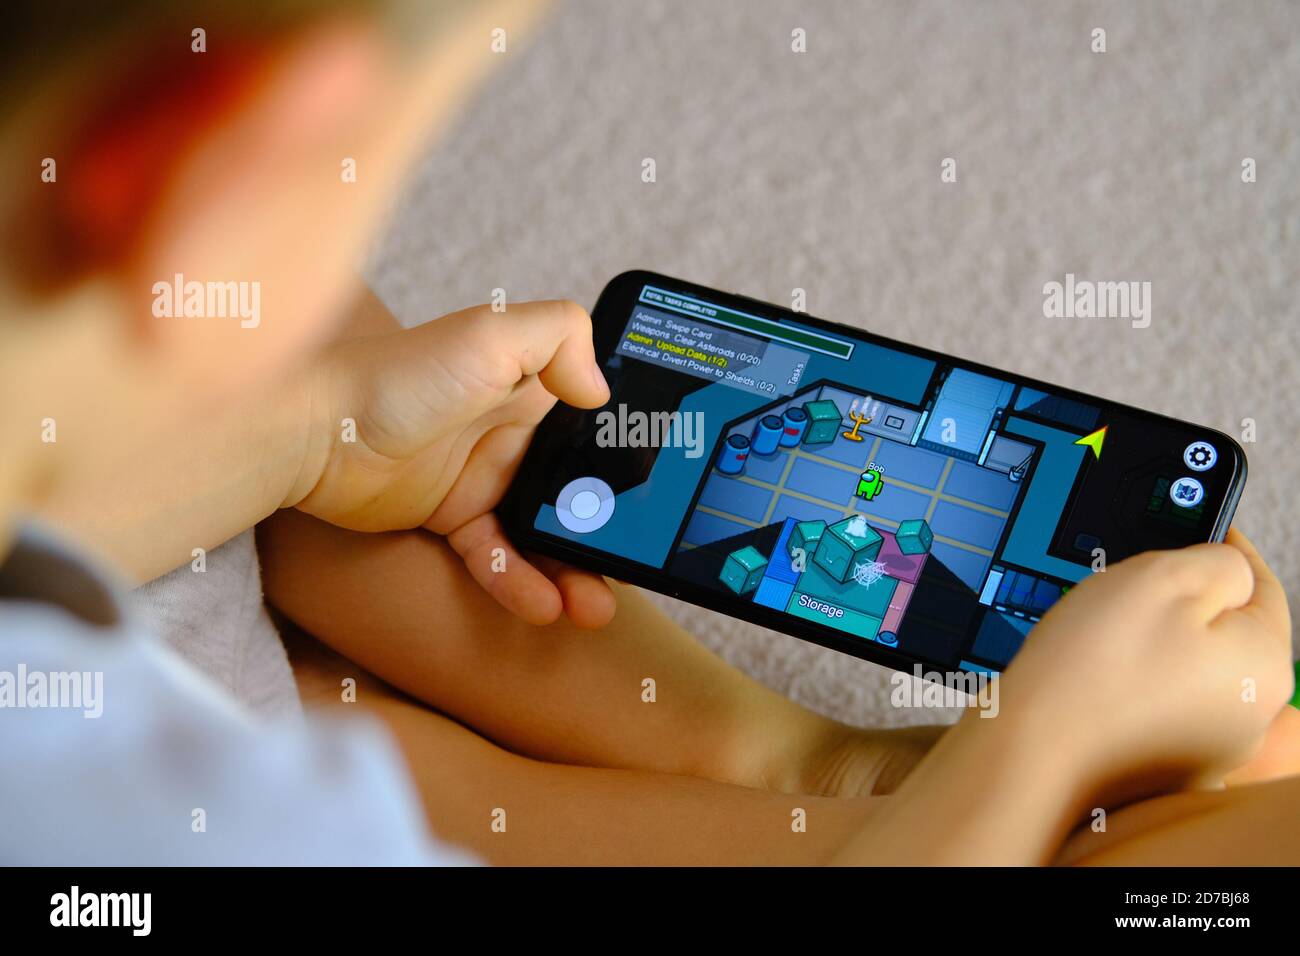 Manchester / United Kingdom - October 21, 2020: Among Us game seen on the smartphone screen and child playing it. New popular app. Stock Photo